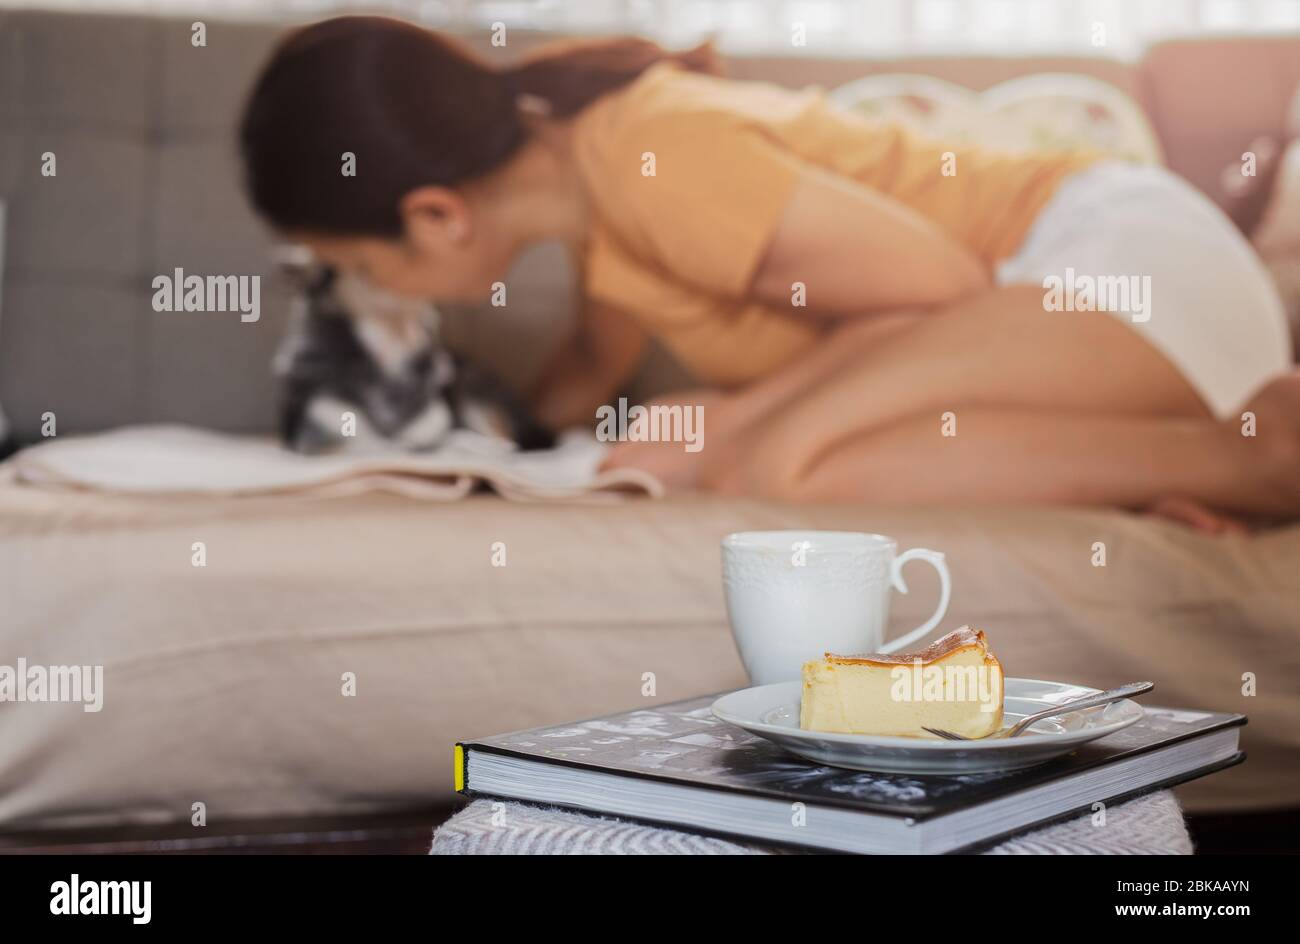 Relaxing woman kissing her dog on sofe with basque burnt cheesecake and coffee on the table Stock Photo